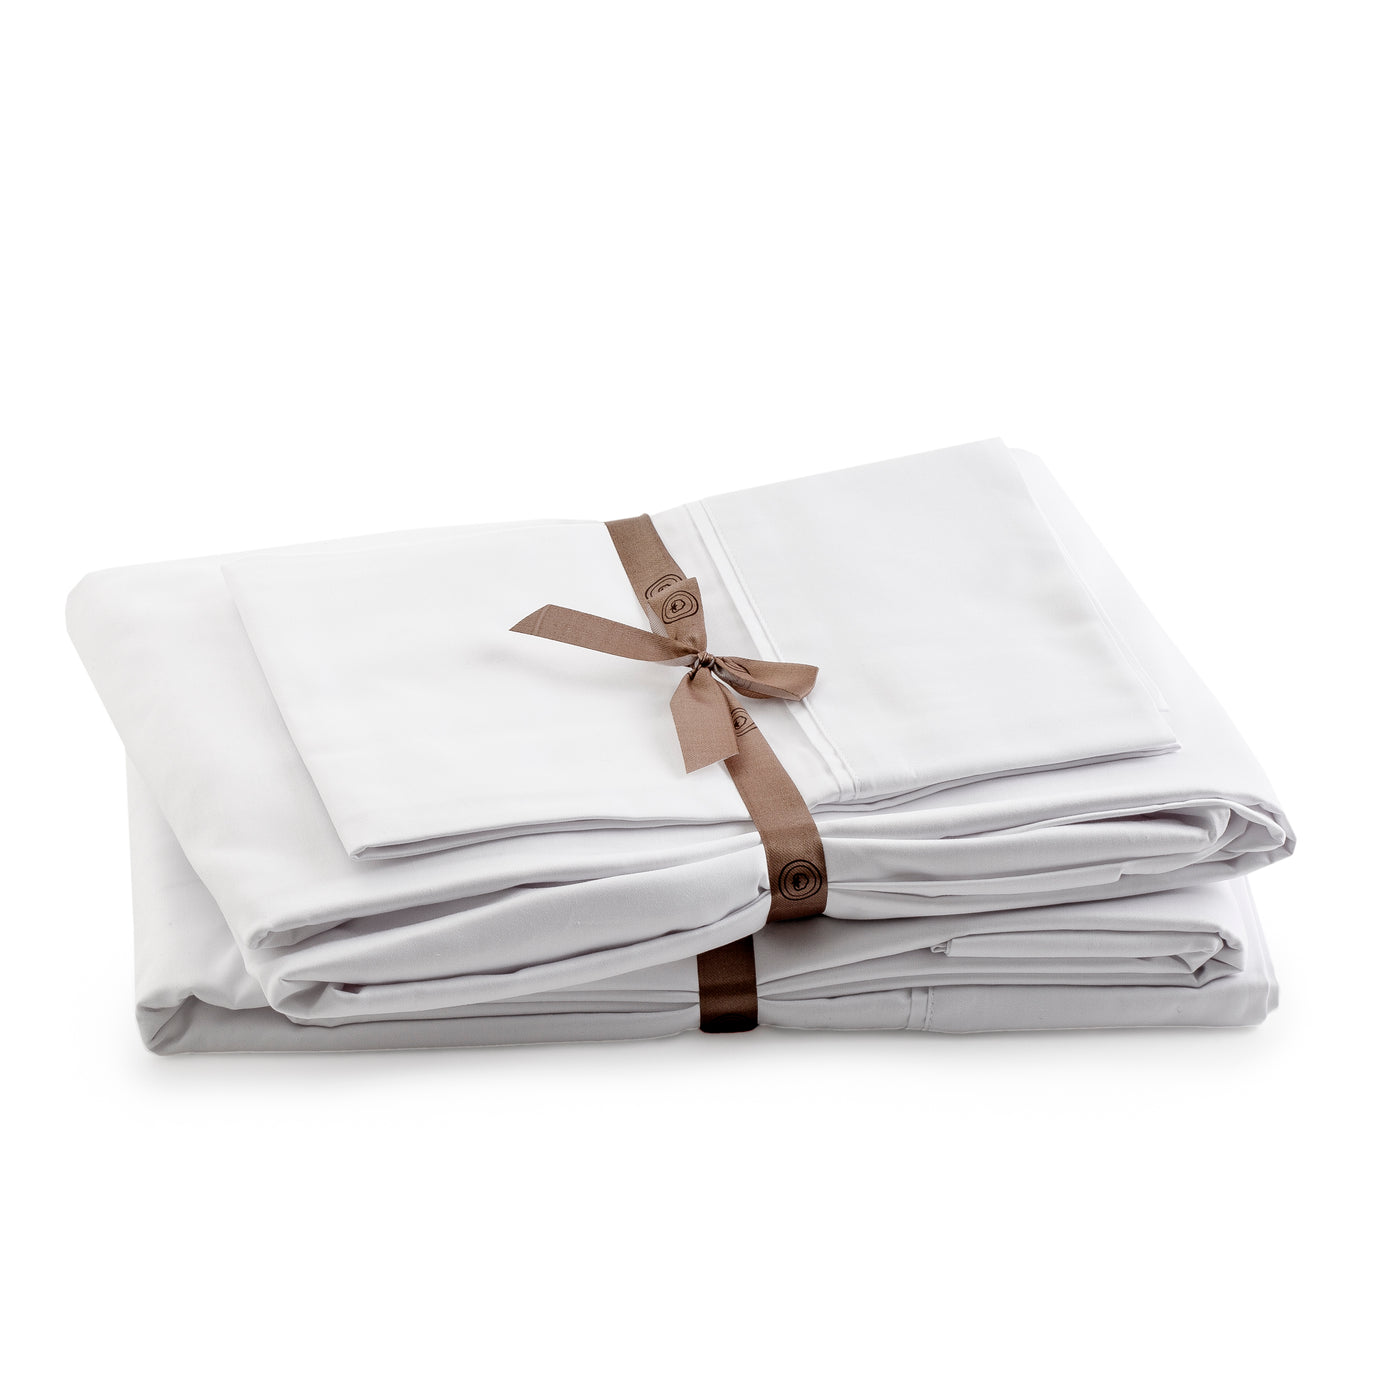 285 Thread Count Percale Bed Sheet Set | White